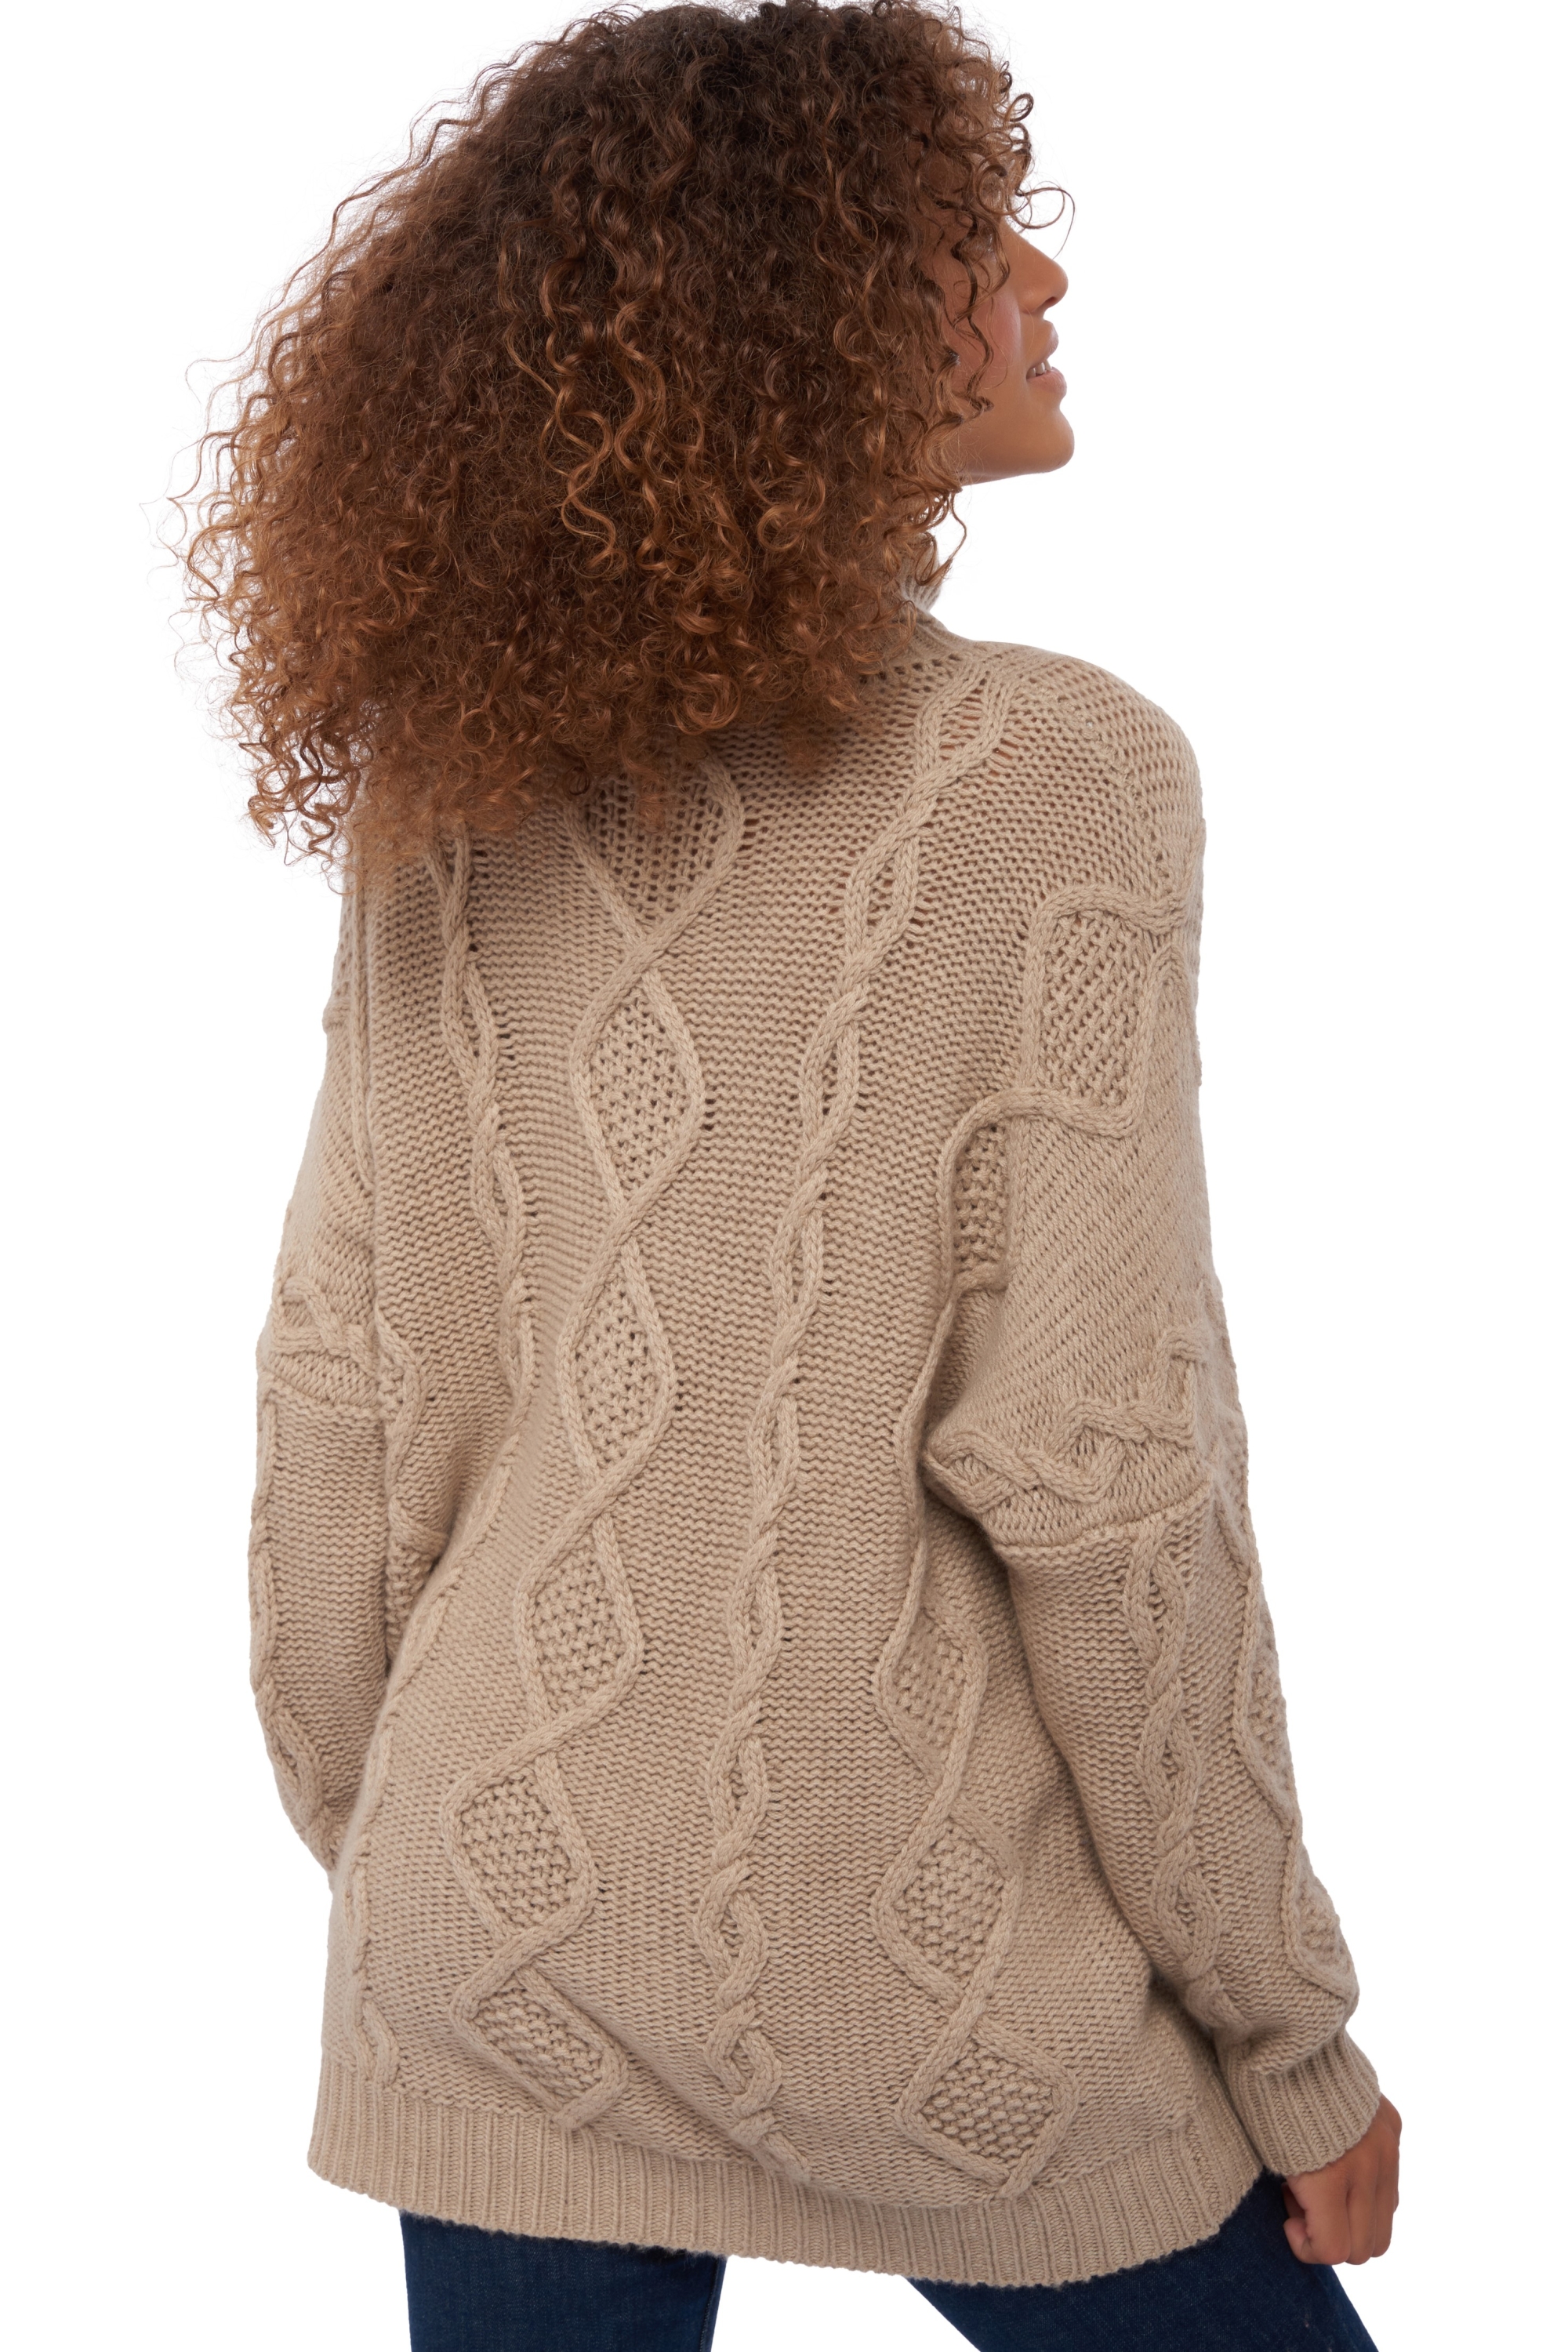 Cachemire pull femme col roule zenith natural stone m